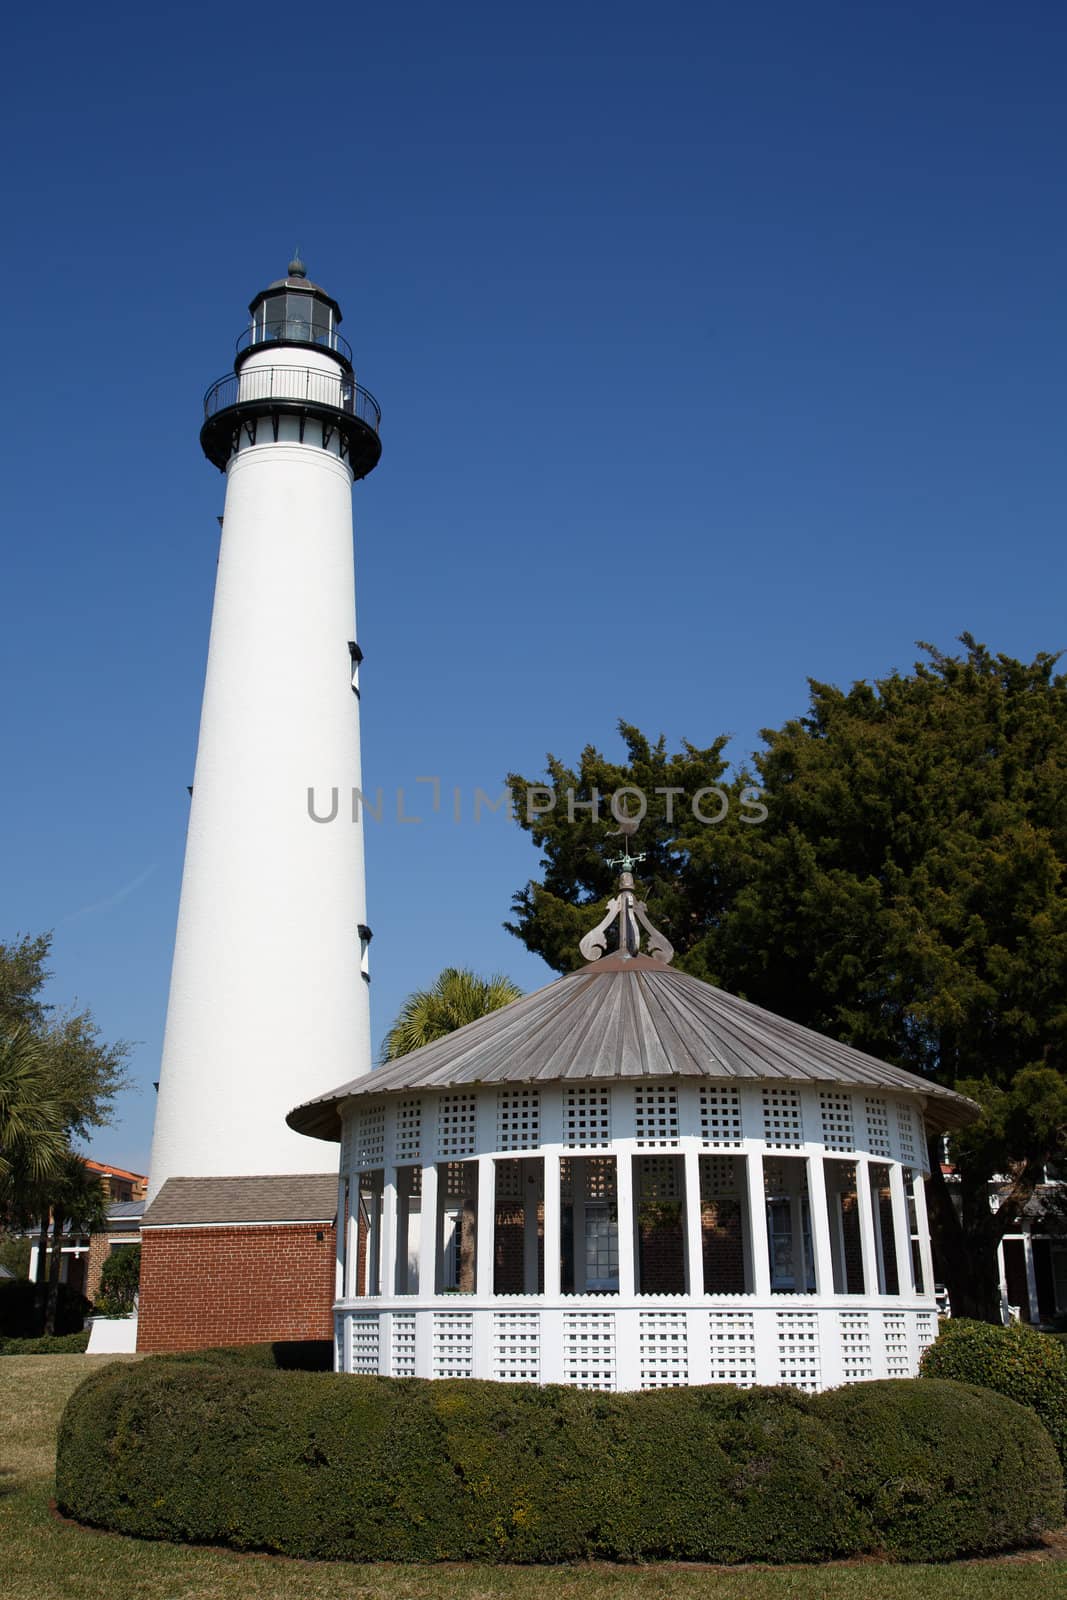 A white lighthouse under clear blue skies with a white gazebo